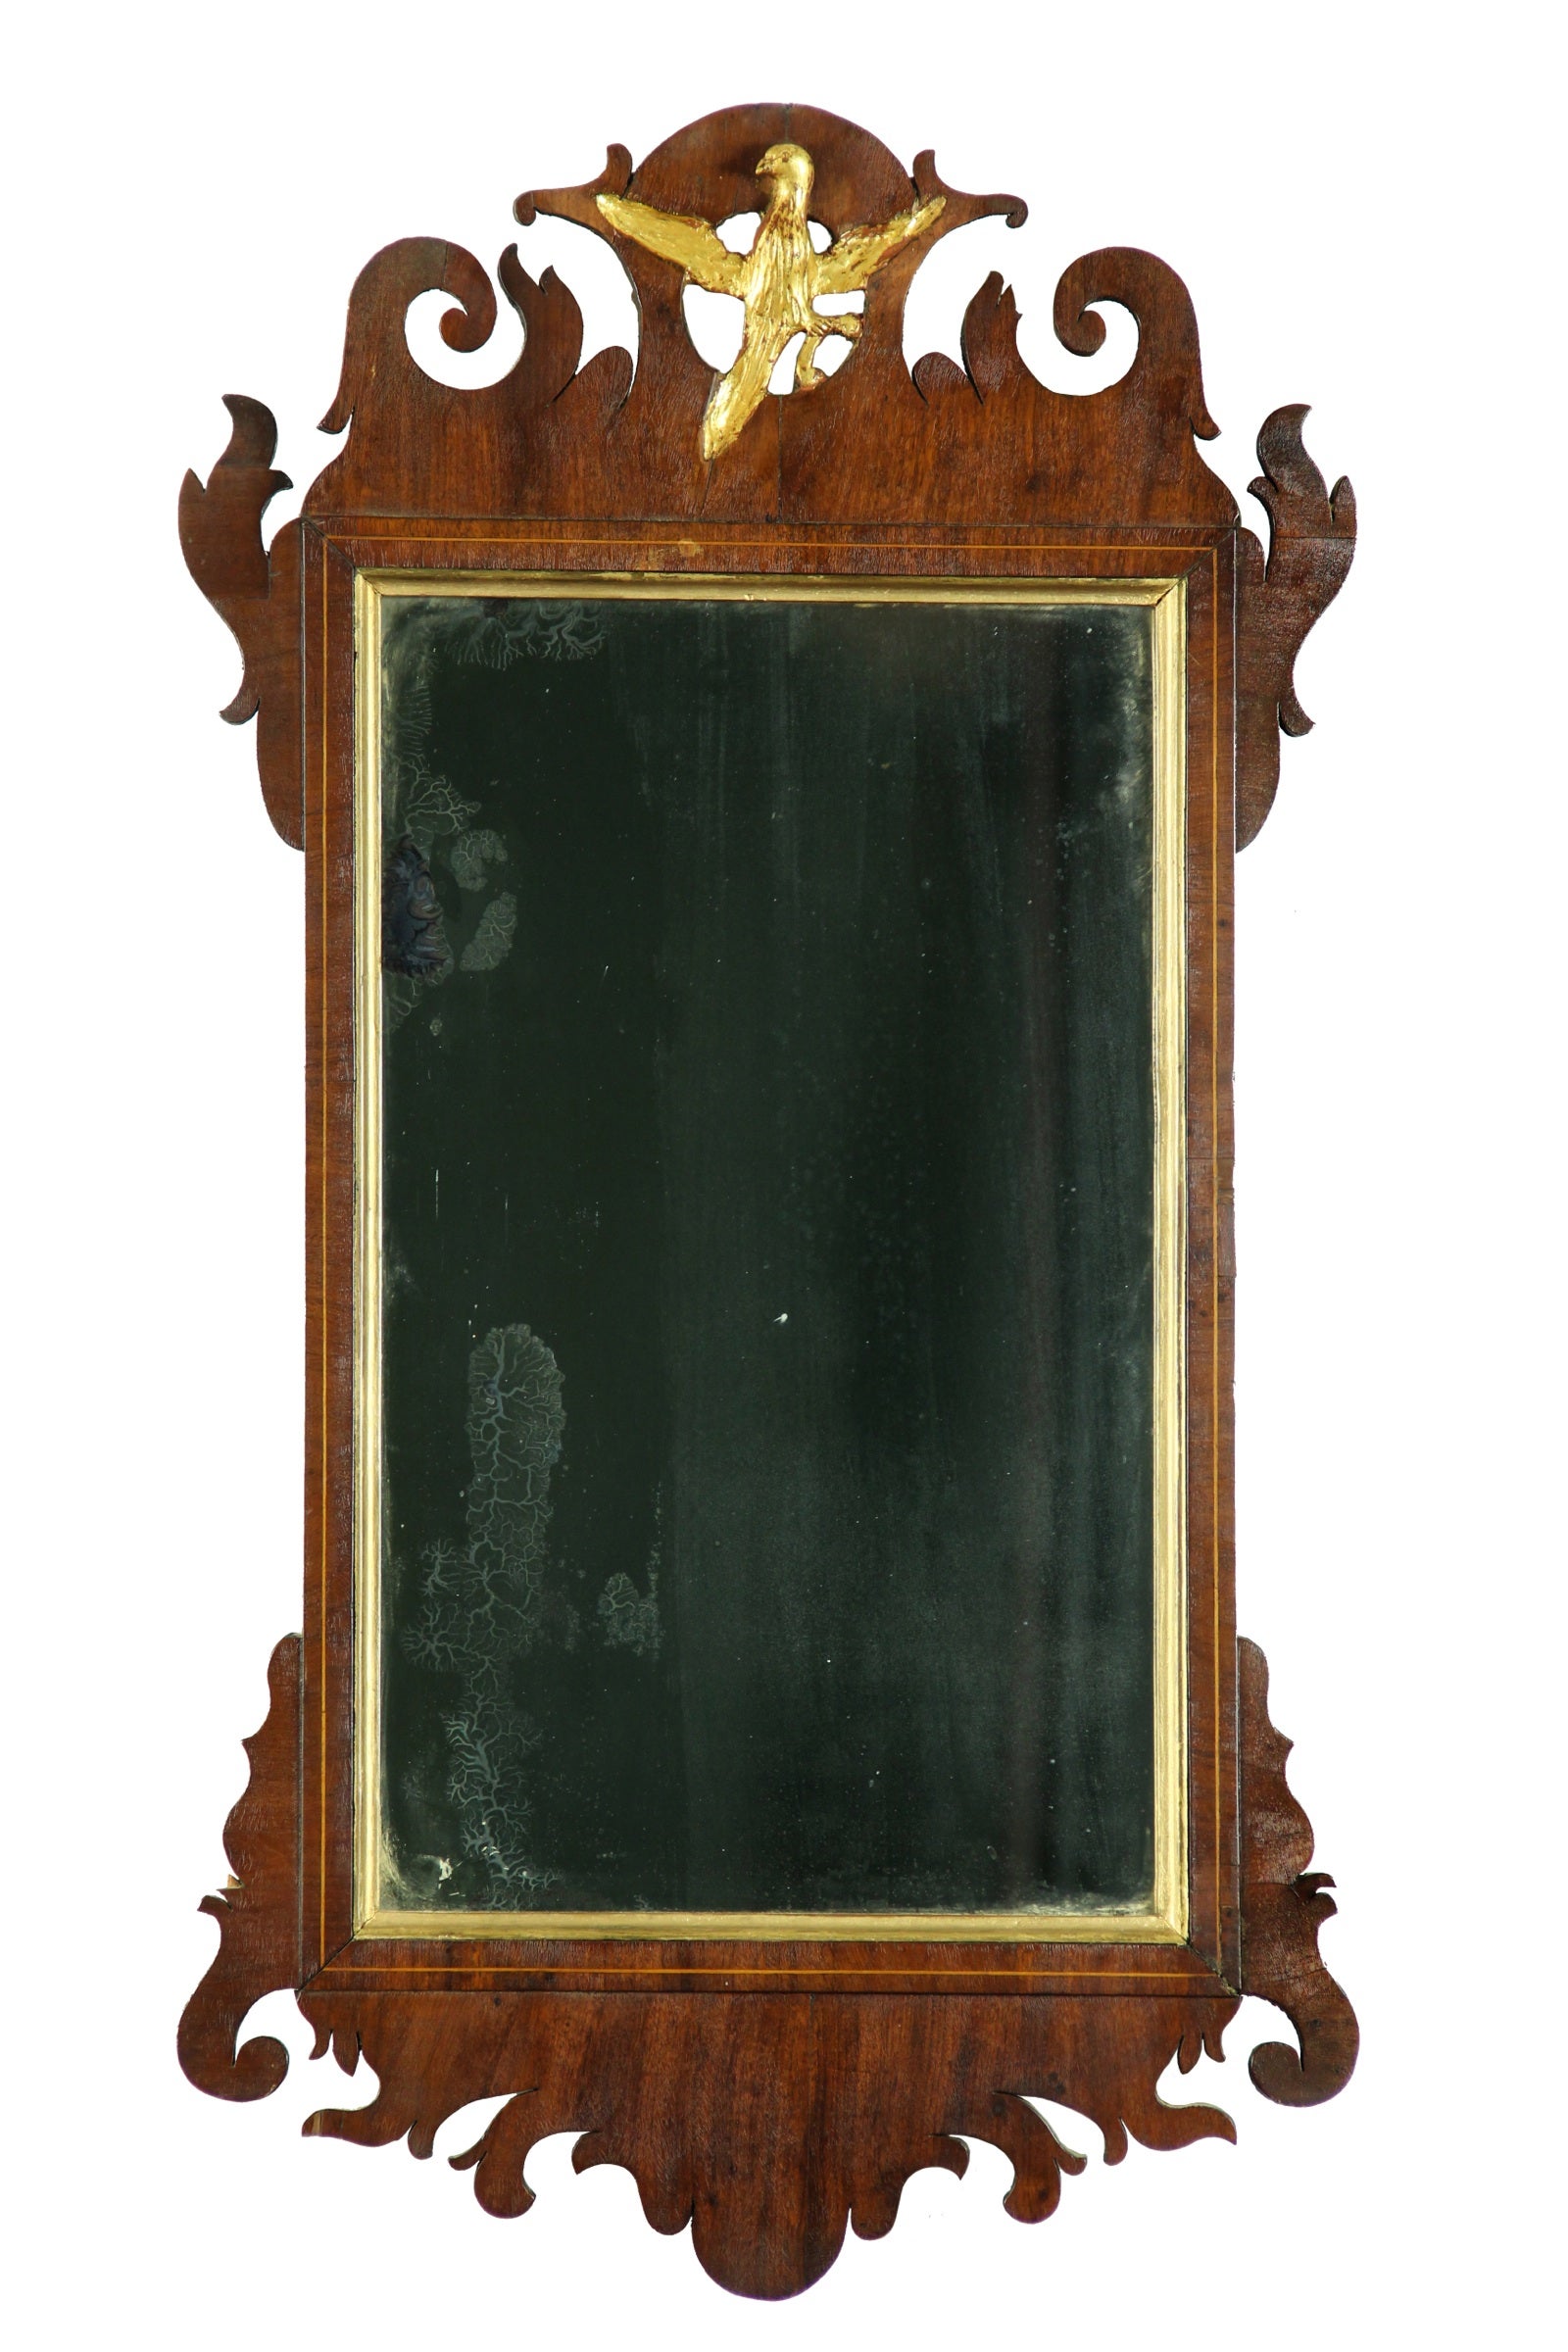 Early Federal Mahogany Mirror with Carved Dove, American or English